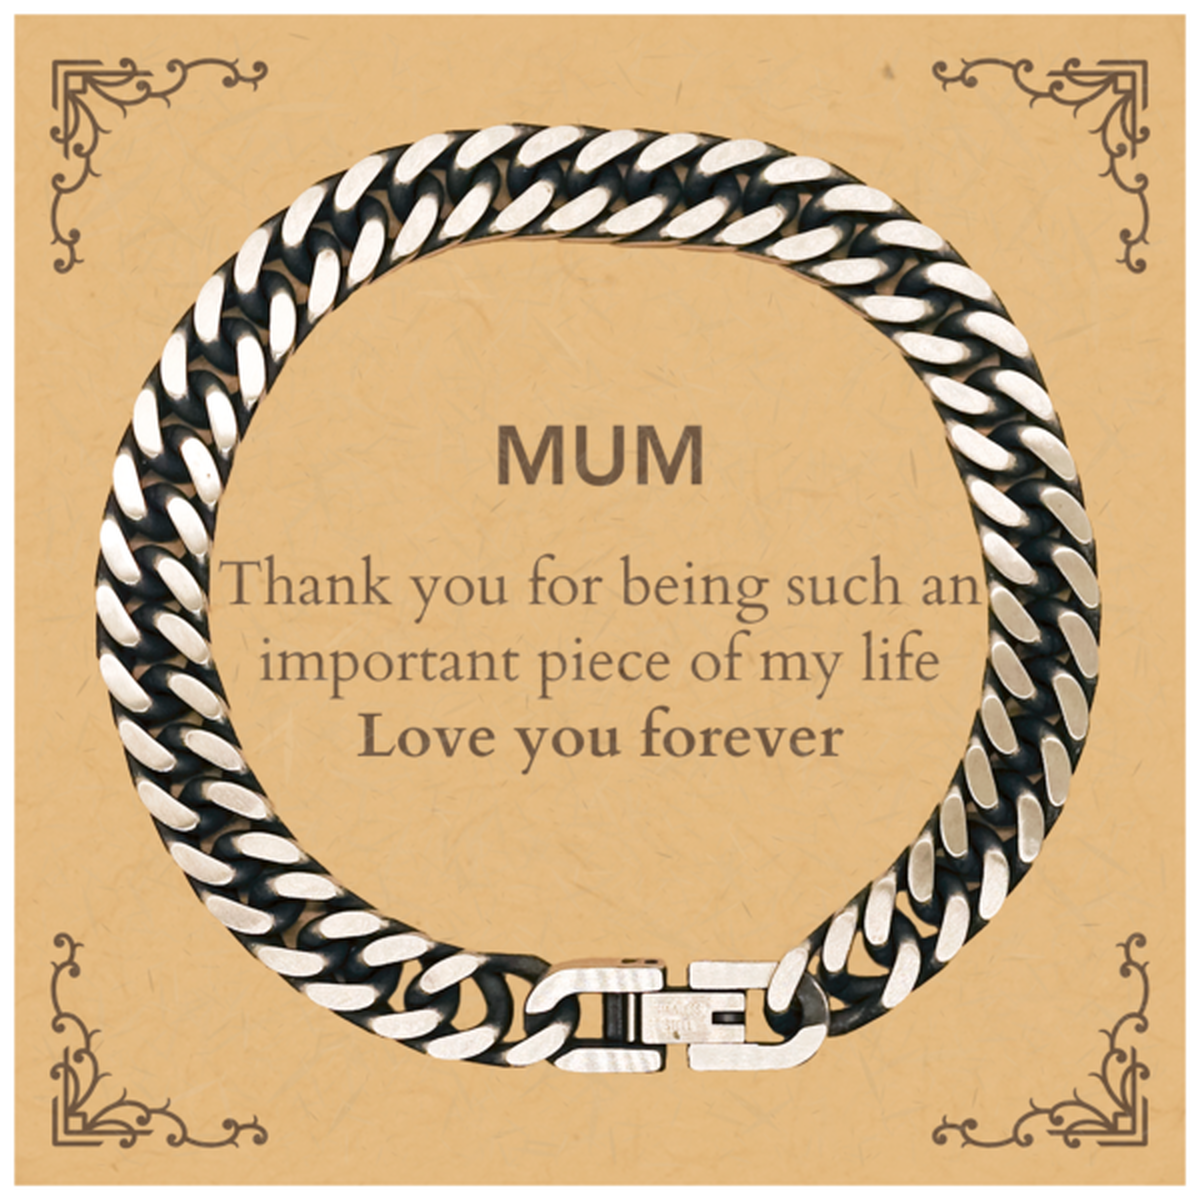 Appropriate Mum Cuban Link Chain Bracelet Epic Birthday Gifts for Mum Thank you for being such an important piece of my life Mum Christmas Mothers Fathers Day